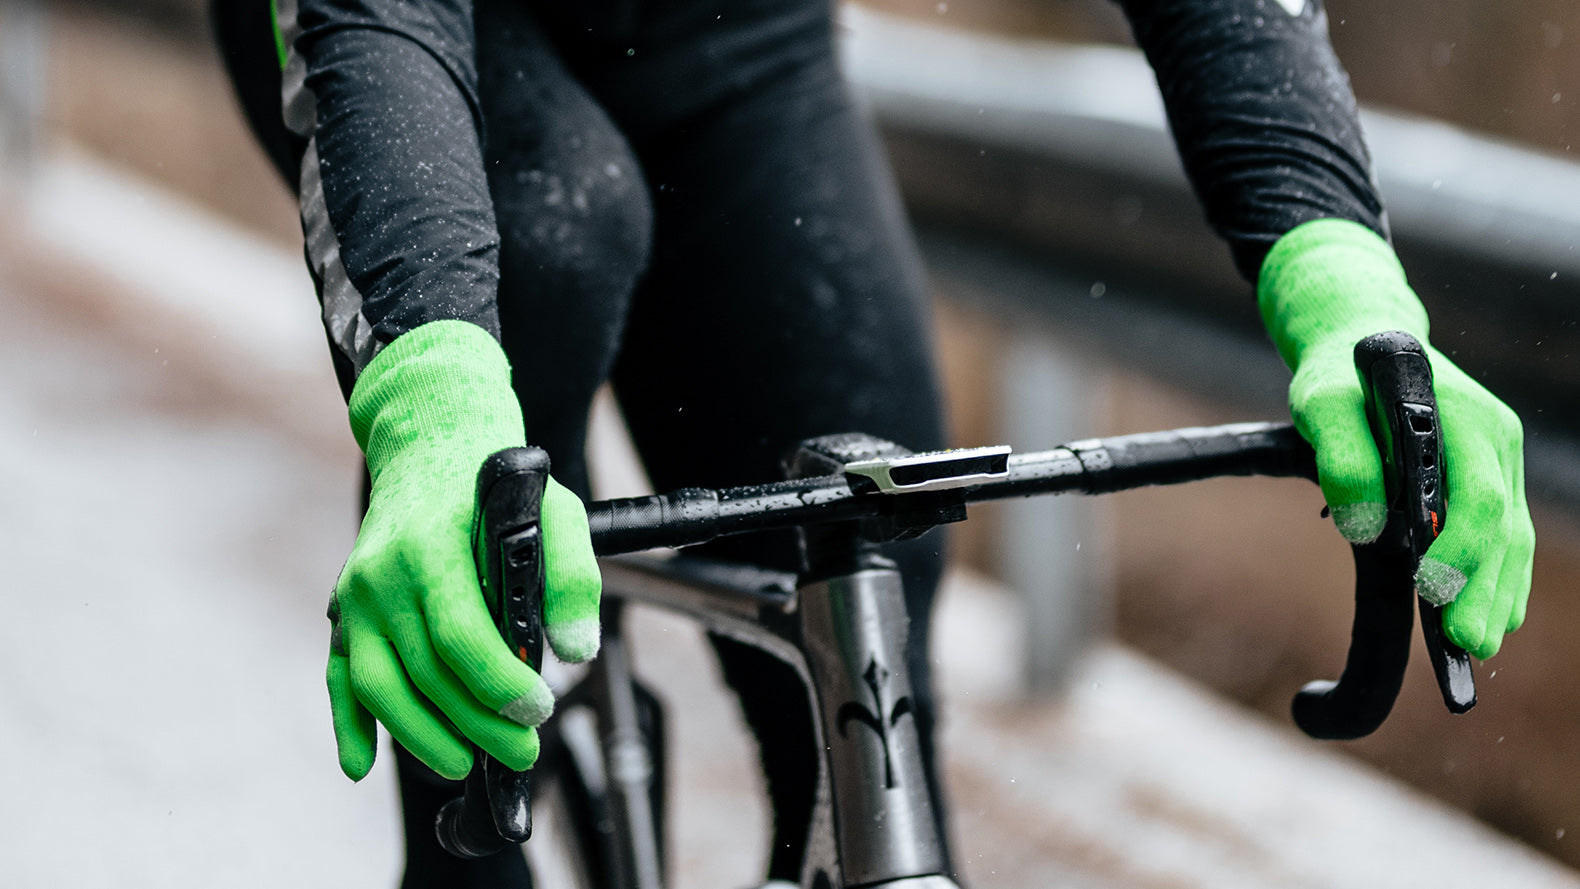 Q36.5 Anfibio Winter Rain Gloves | Strictly Bicycles